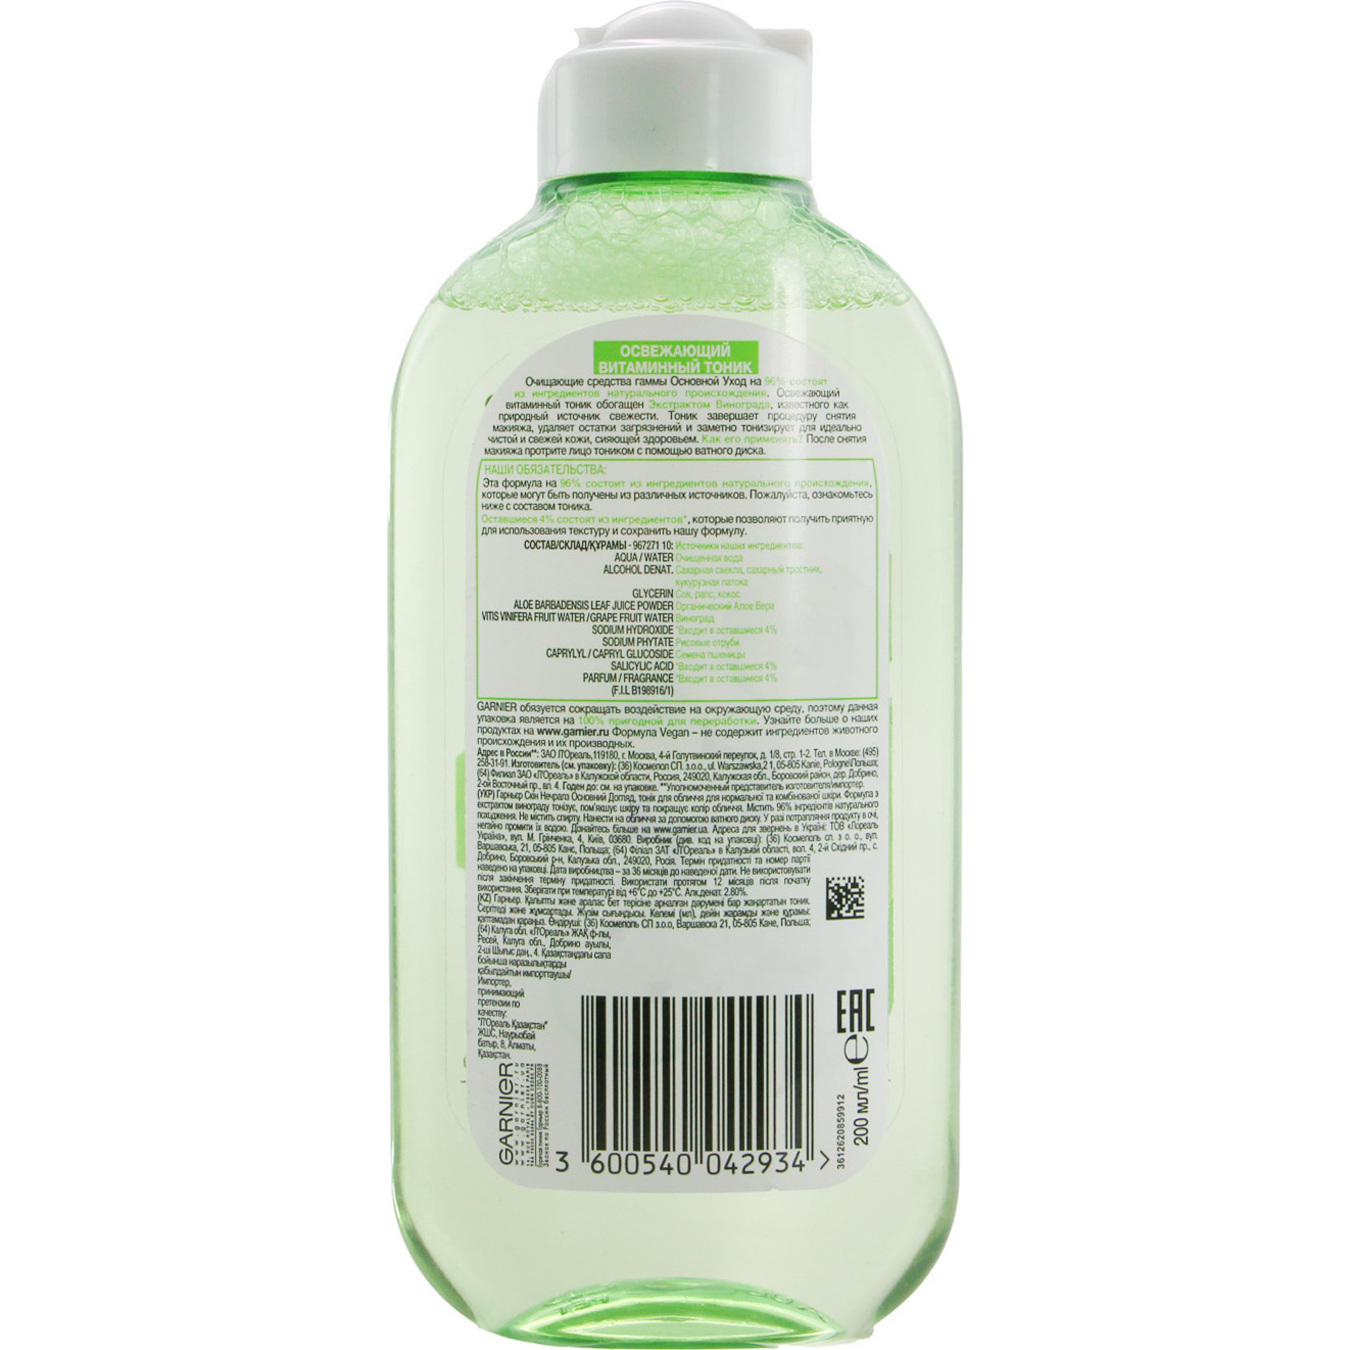 Garnier Skin Naturals Tonic for Normal and Combination Skin 200ml 2